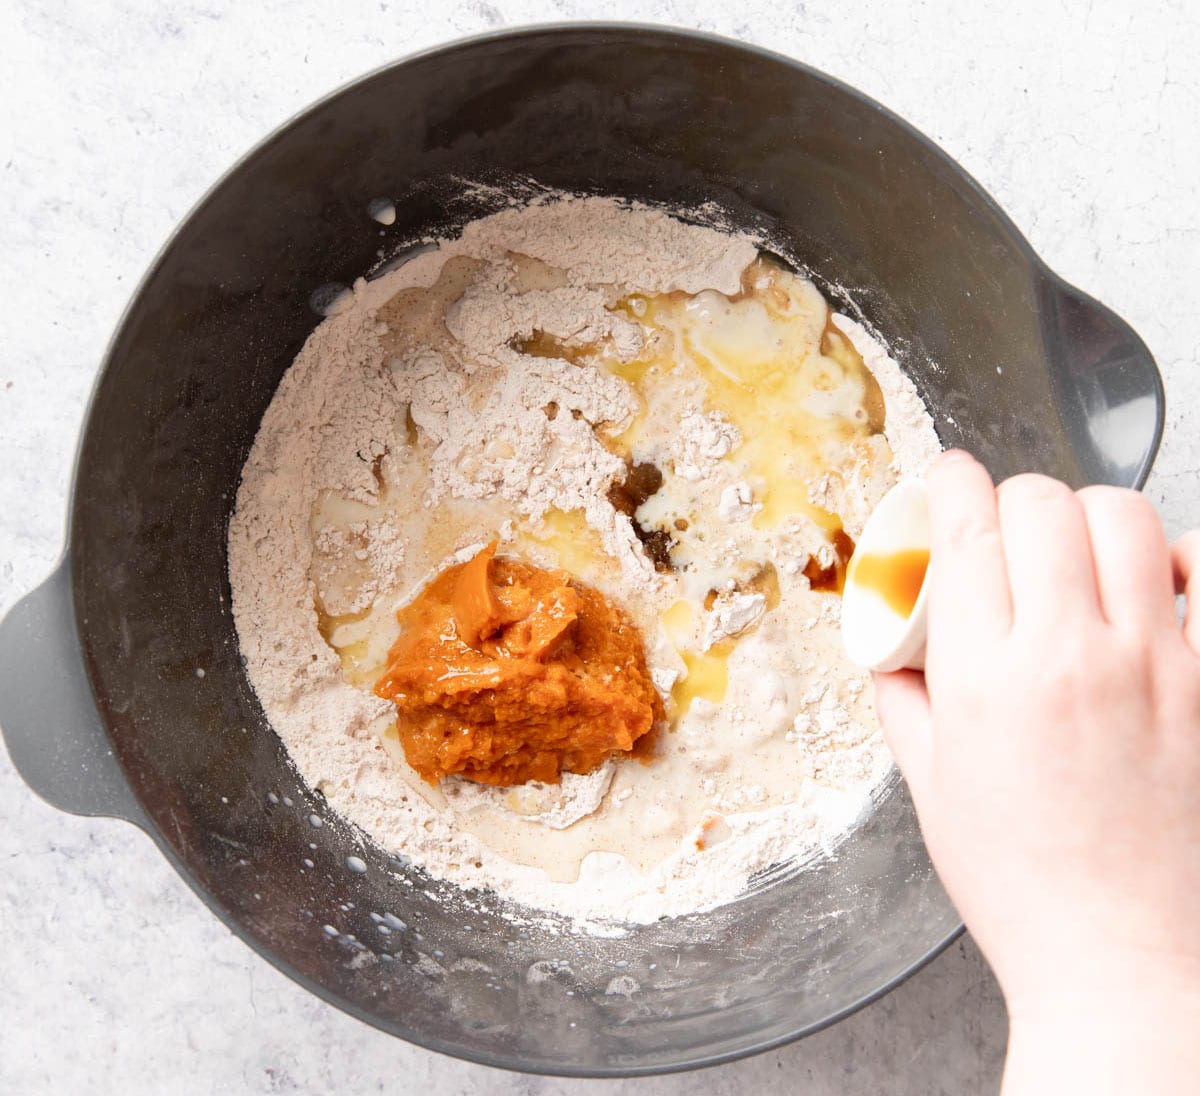 One photo showing How to Make Pumpkin Pancakes – adding the wet ingredients to the dry ingredients in the mixing bowl